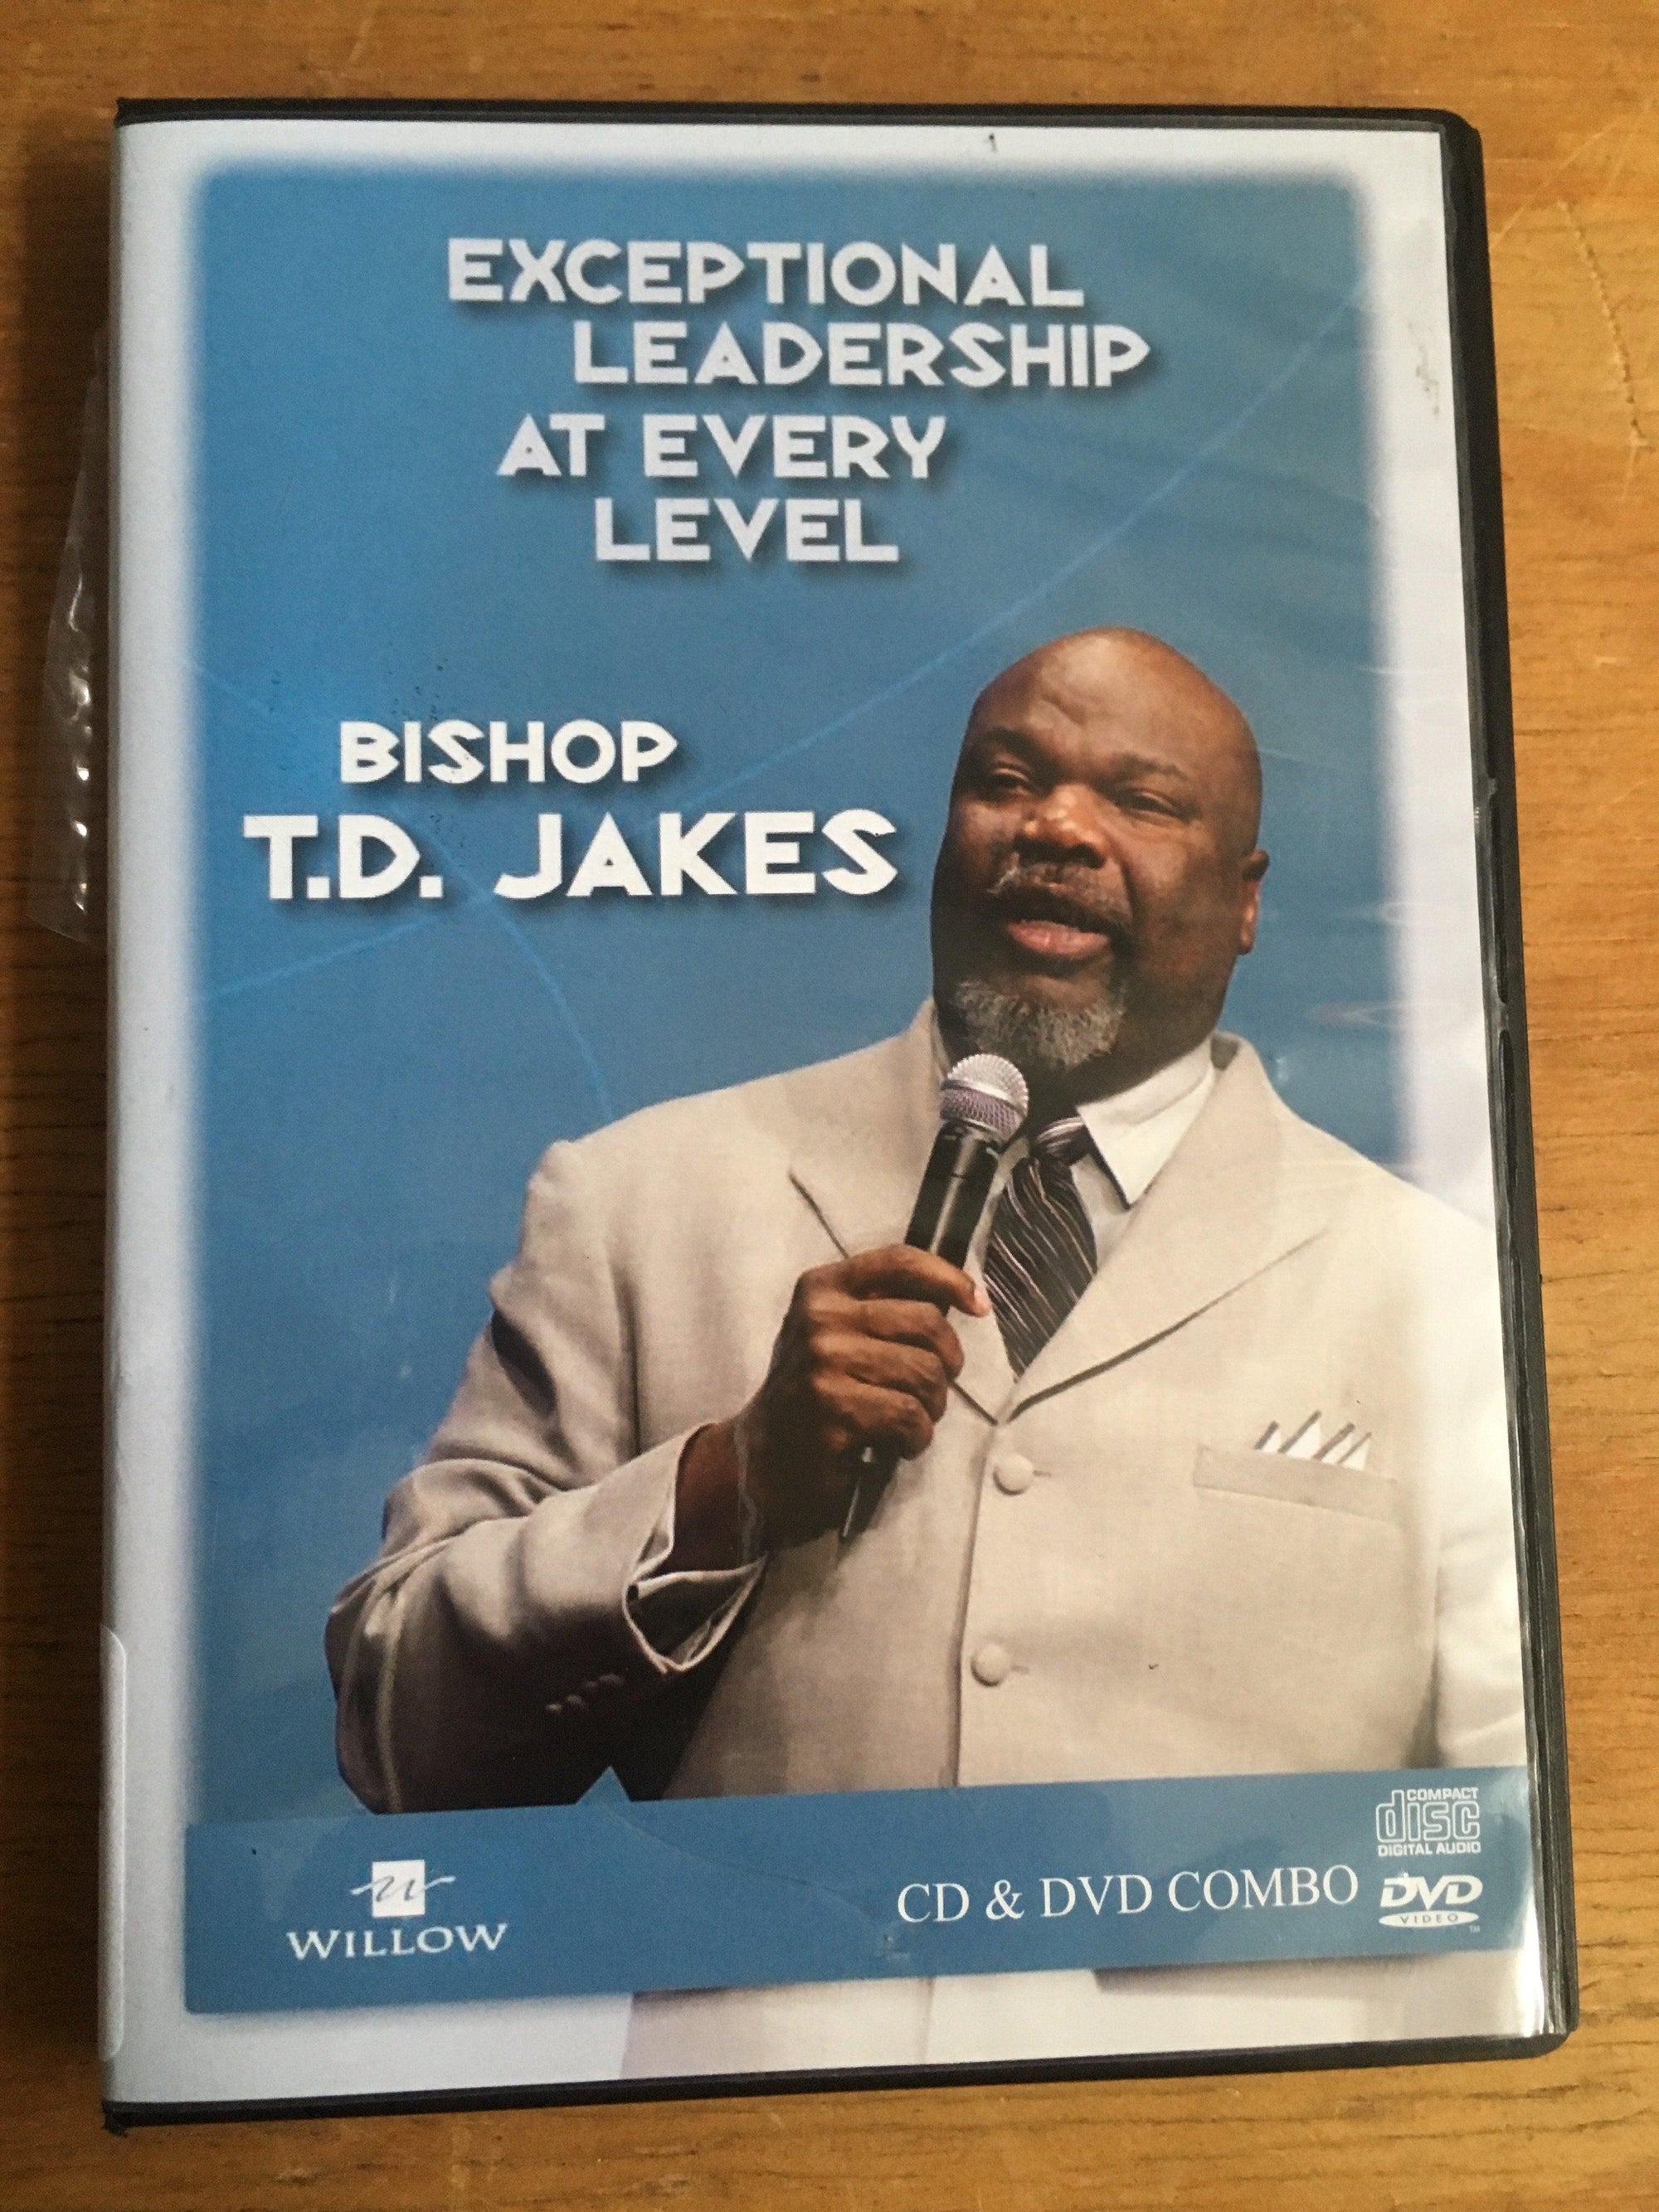 Exceptional Leadership At Every Level (DVD) - 2ndhandwarehouse.com